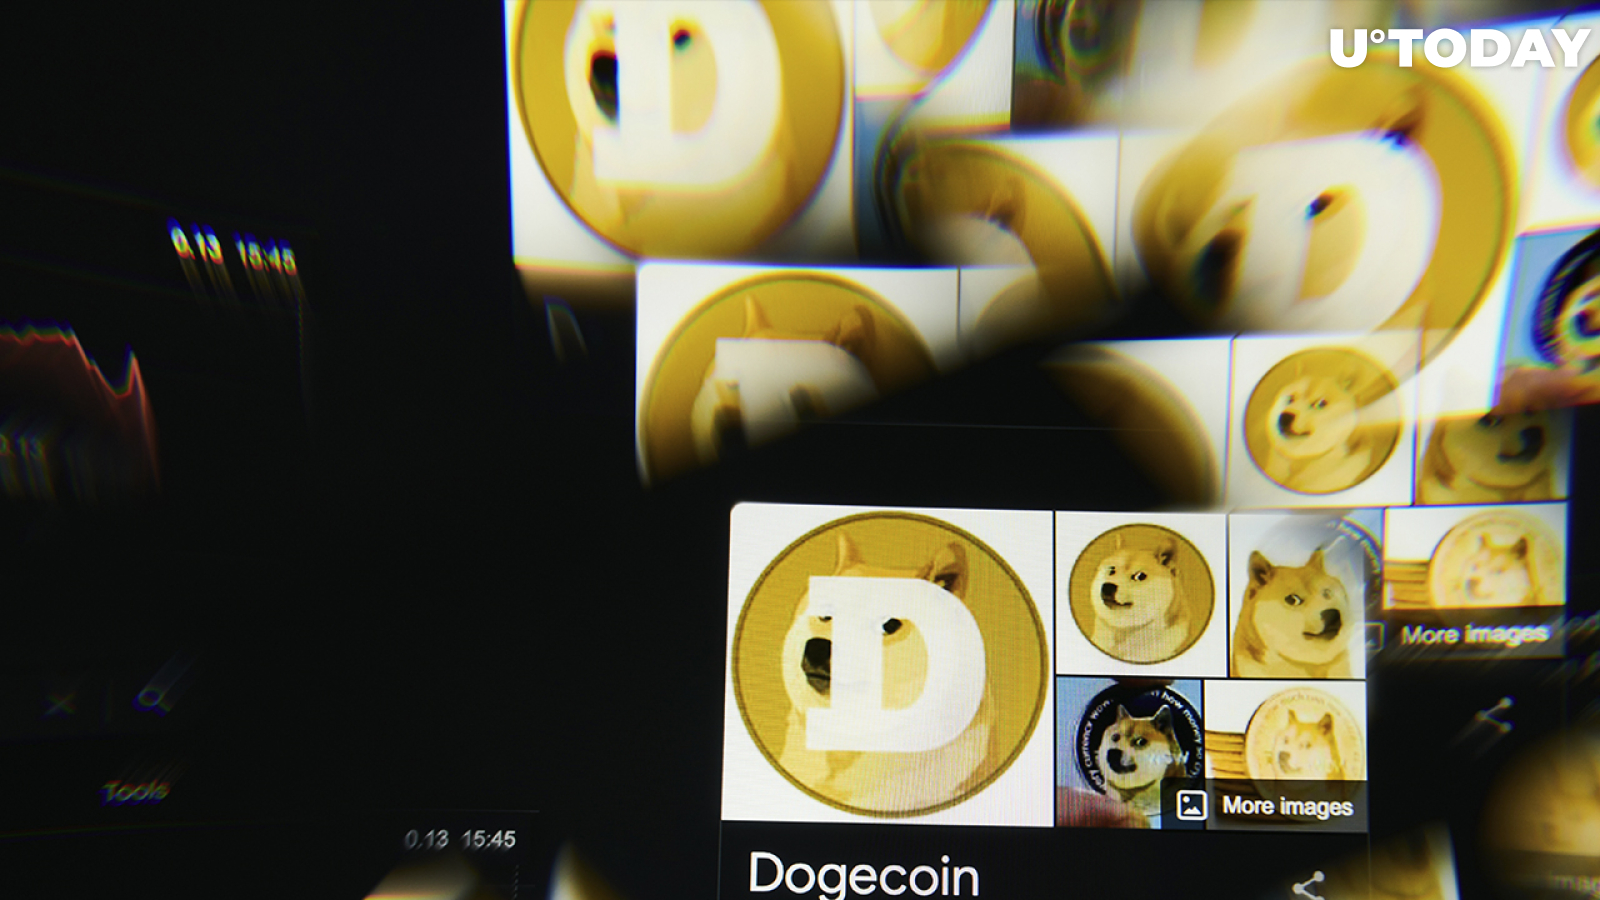 Dogecoin Creator Sends His Personal DOGE NFT Collection to Sell on OpenSea